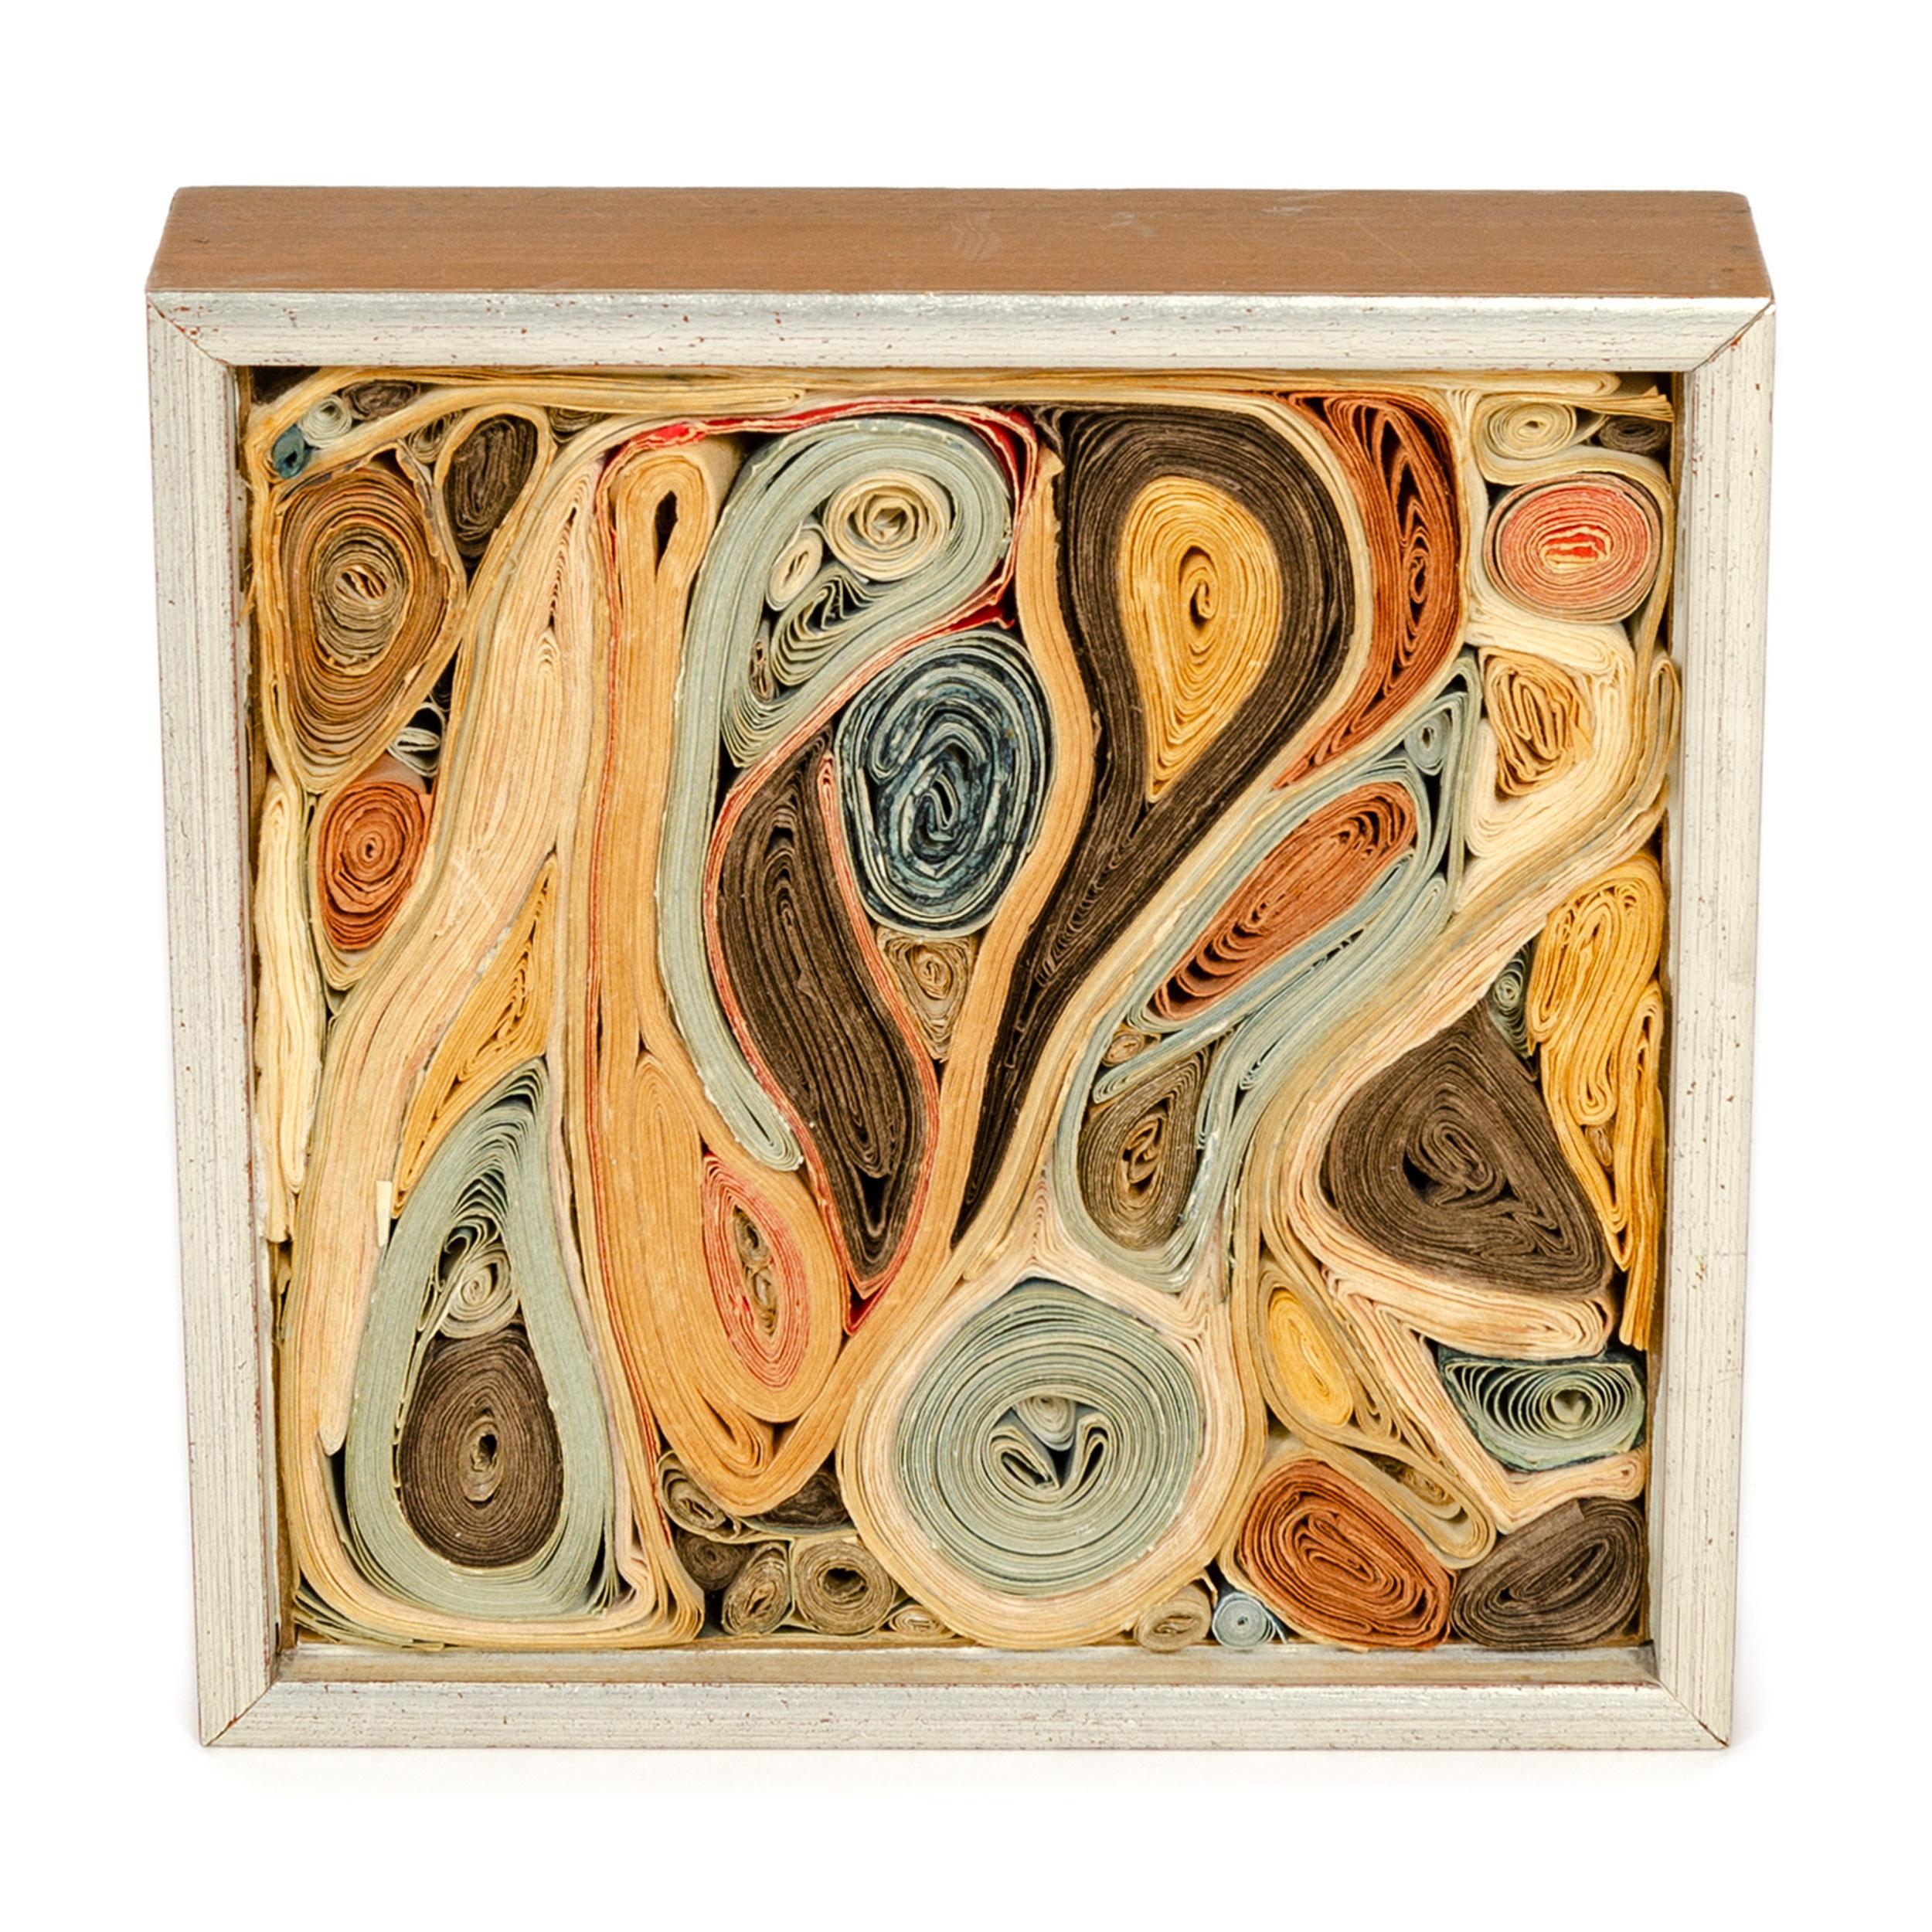 A boxed, abstract construction of colorful quilled paper by American artist Paul Shaub.